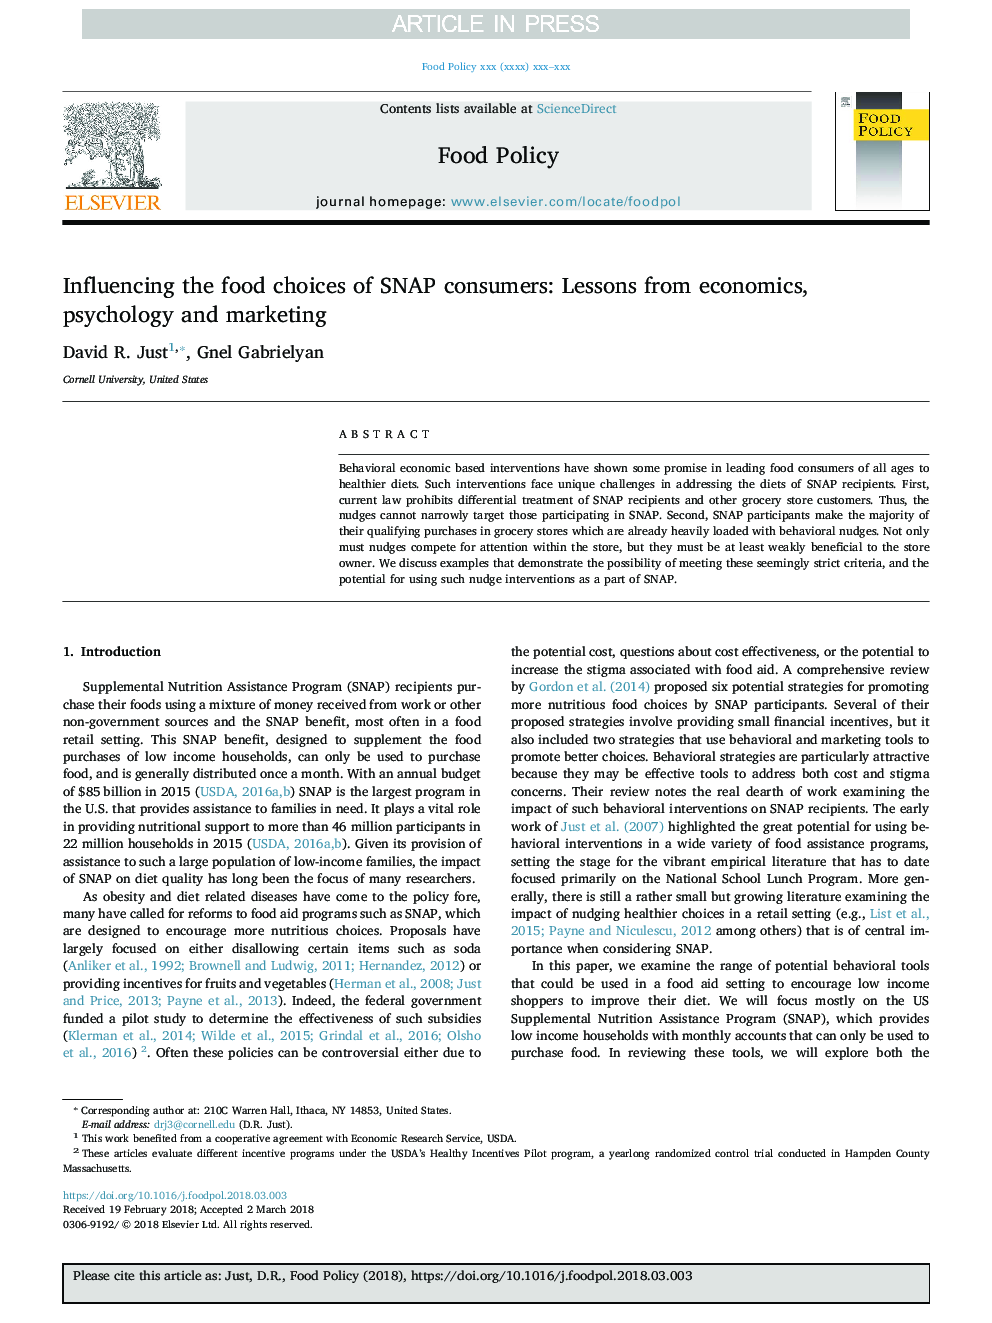 Influencing the food choices of SNAP consumers: Lessons from economics, psychology and marketing